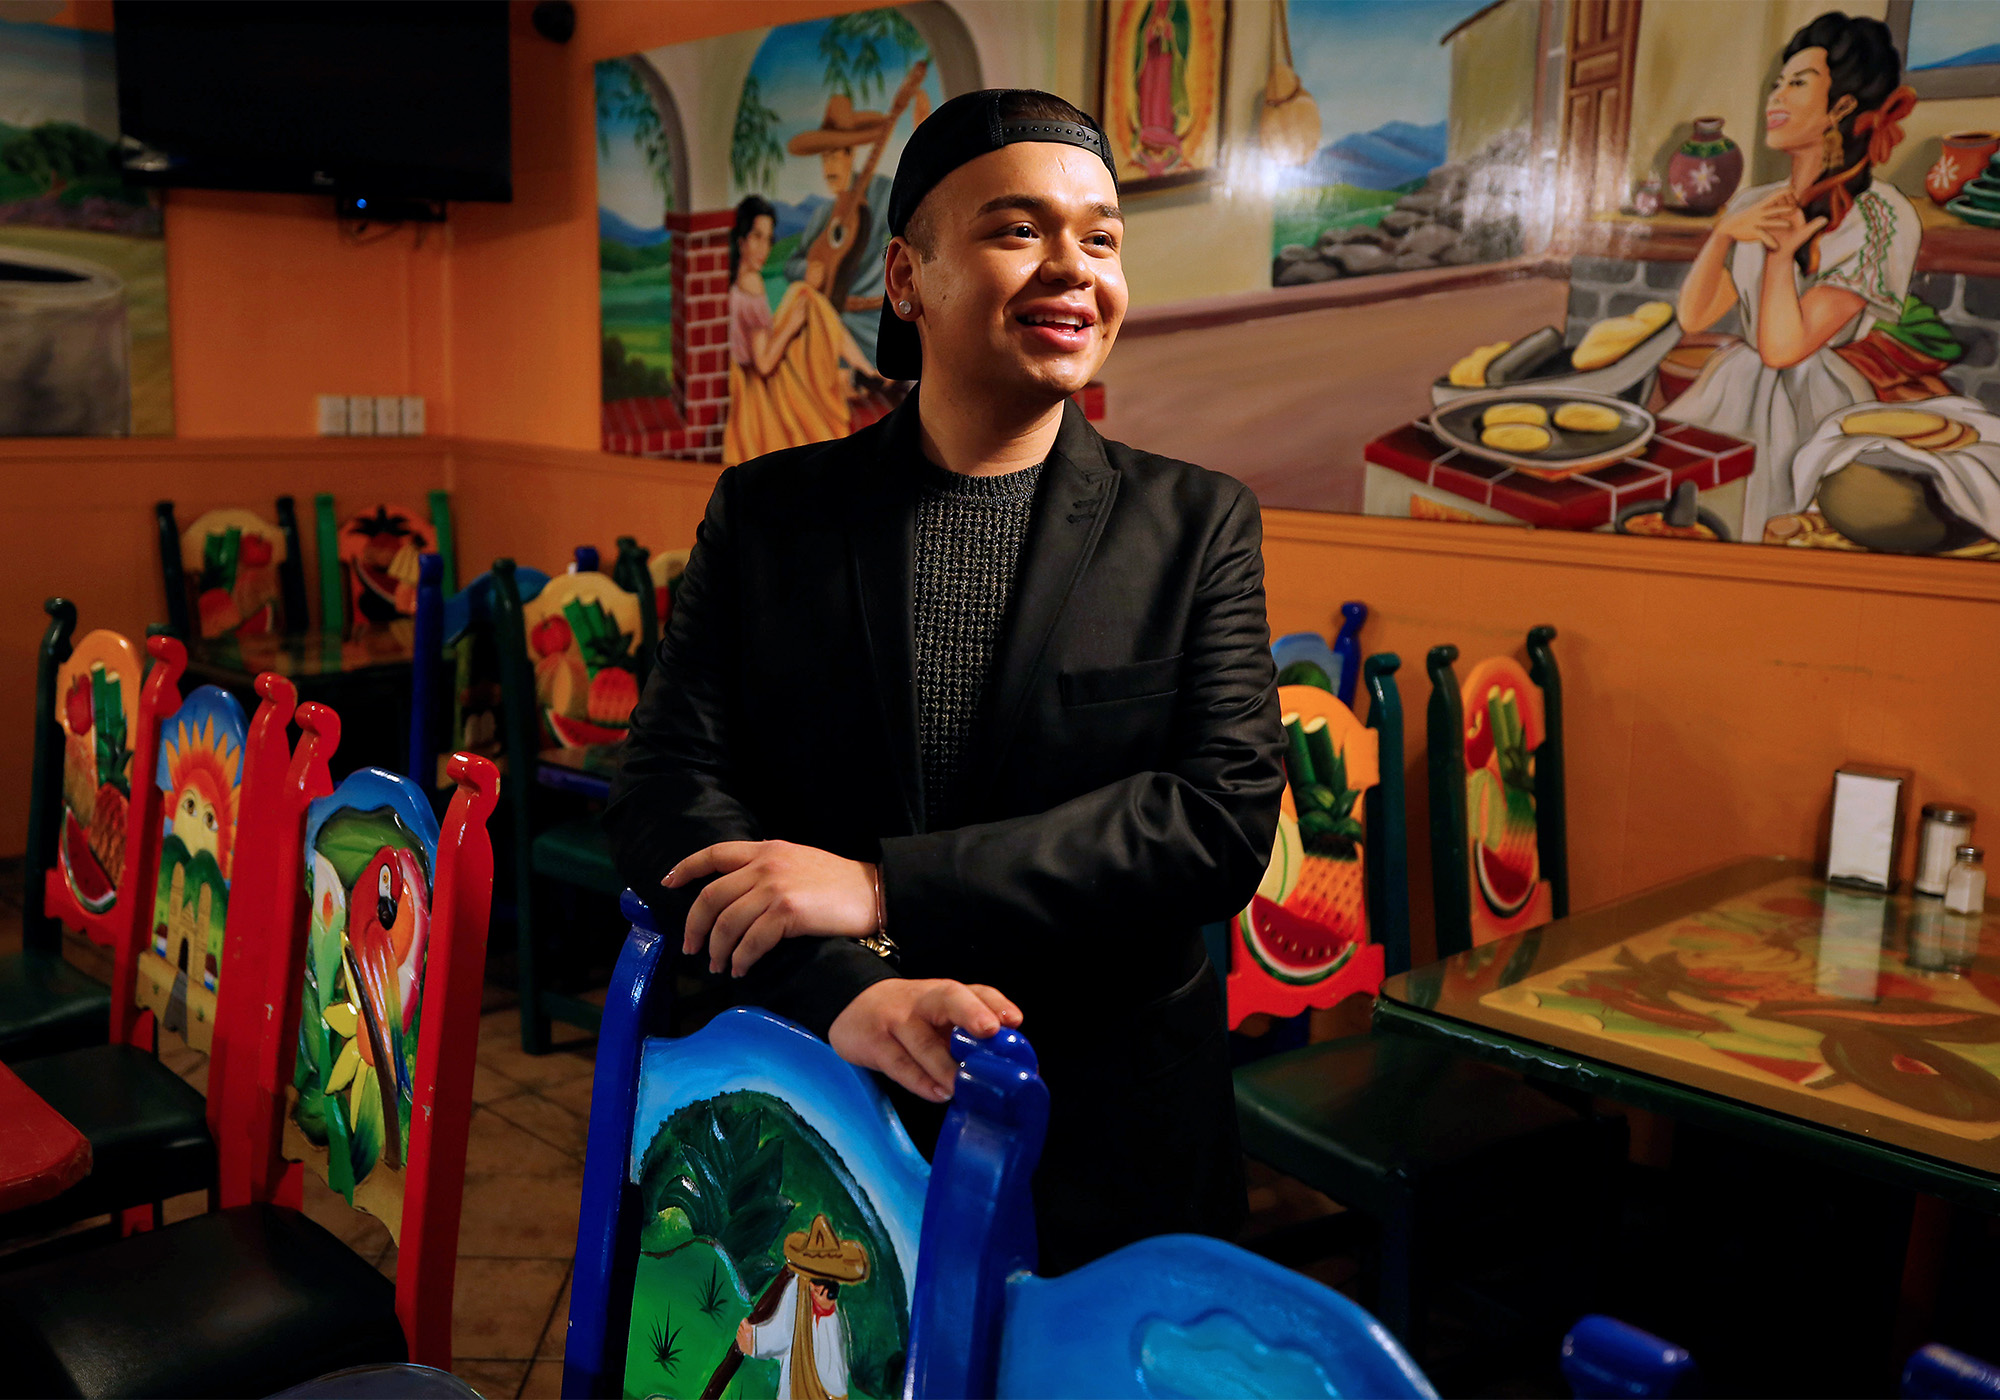 Ivan Reyes, general manager of La Fondita restaurant which is owned by his mother Elena Reyes, poses for a portrait in the dining room of La Fondita restaurant in the Roseland neighborhood of Santa Rosa, California, on Friday, February 15, 2019. (Alvin Jornada / The Press Democrat)